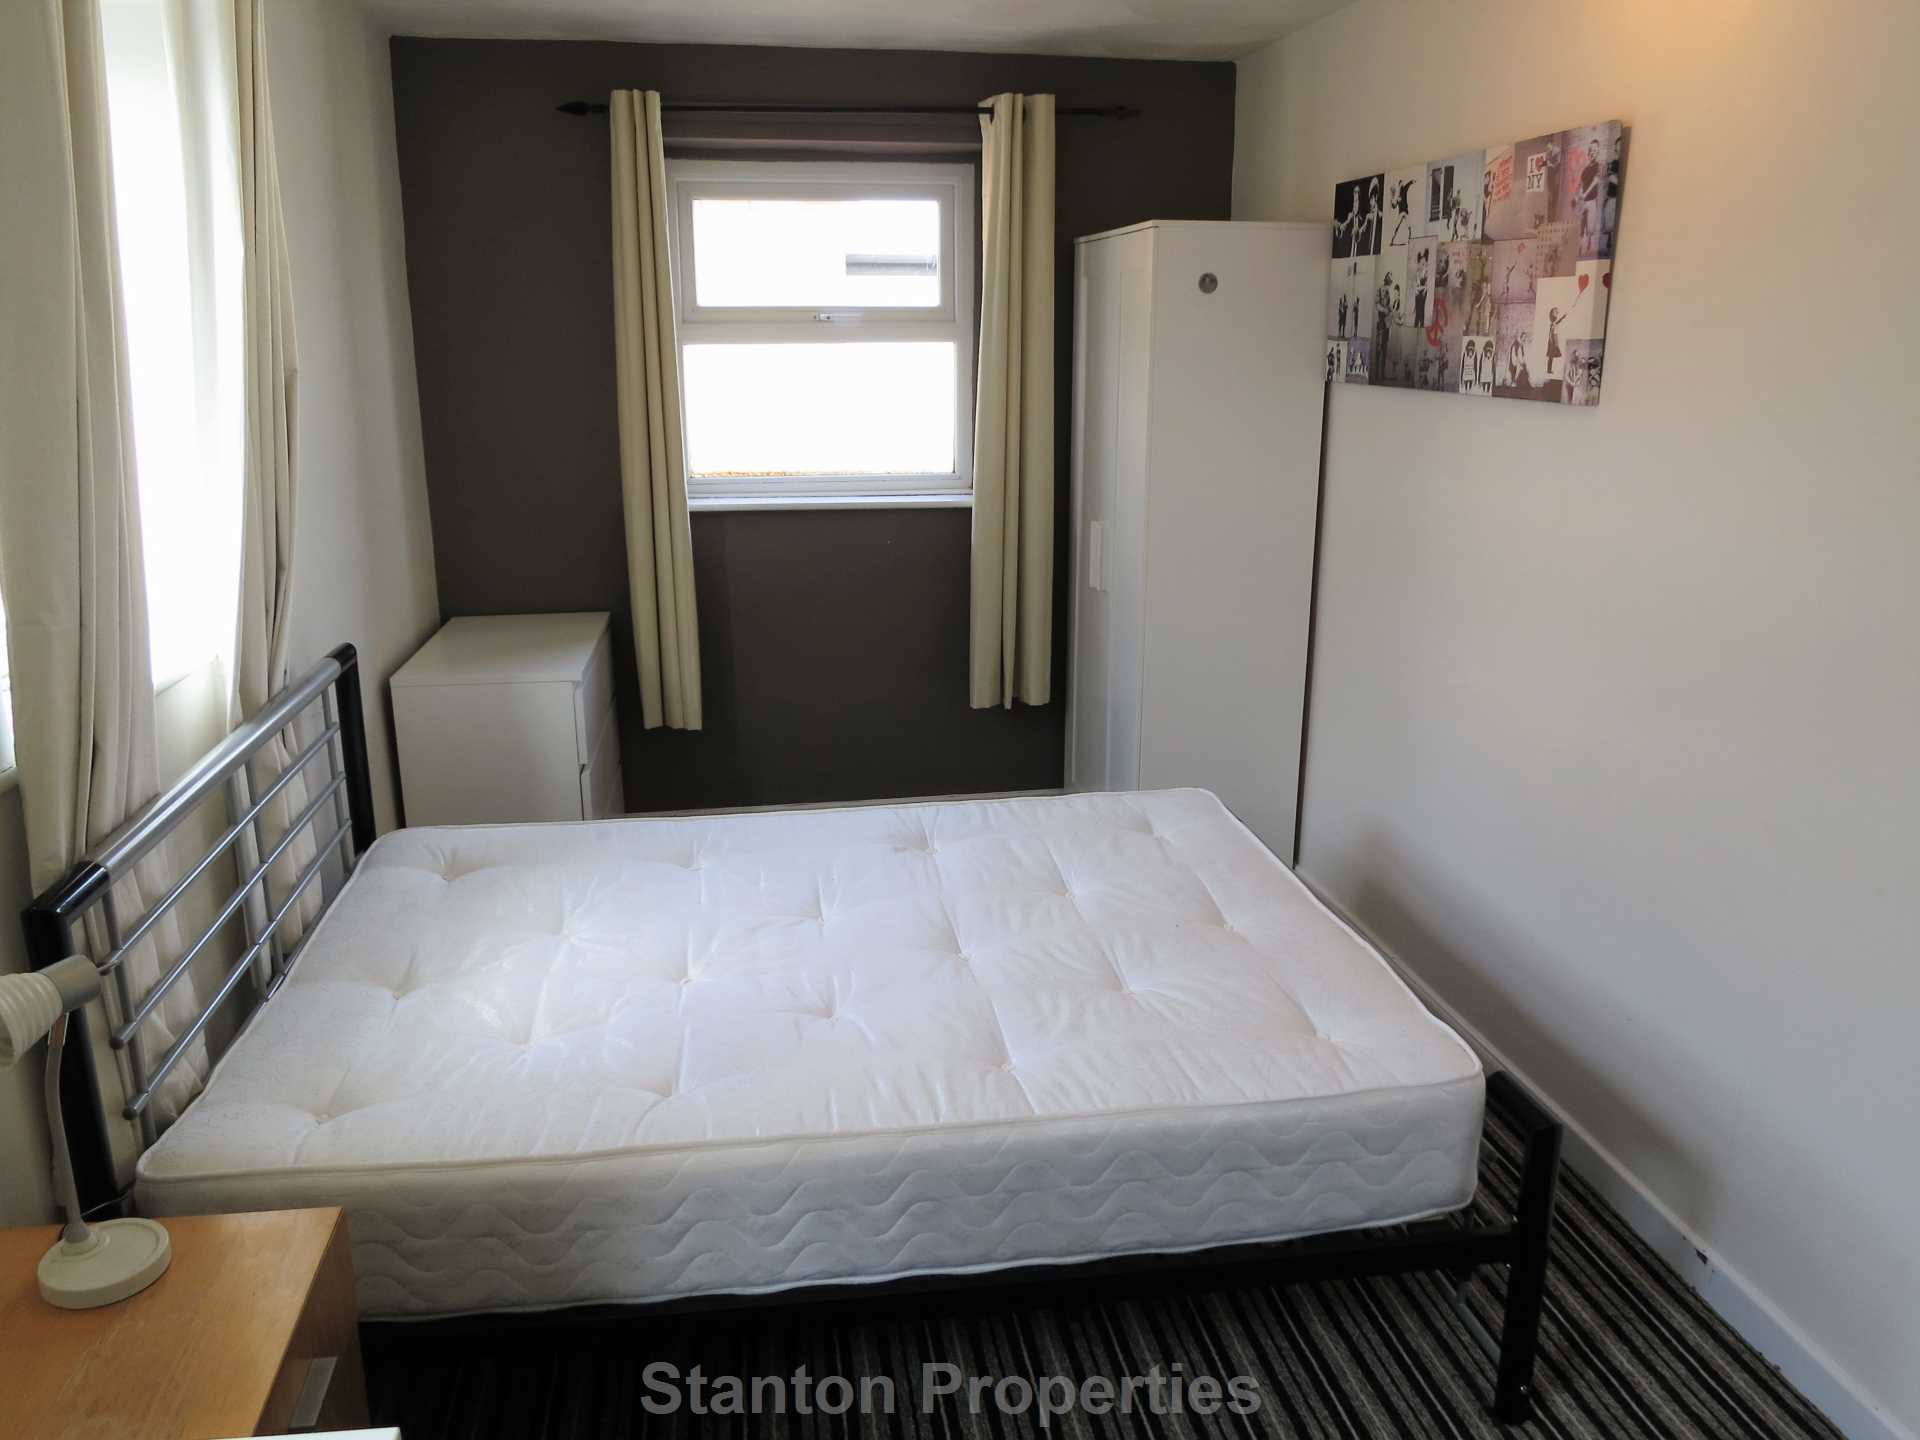 £120 pppw excluding bills, Copson Street, Withington, Image 6